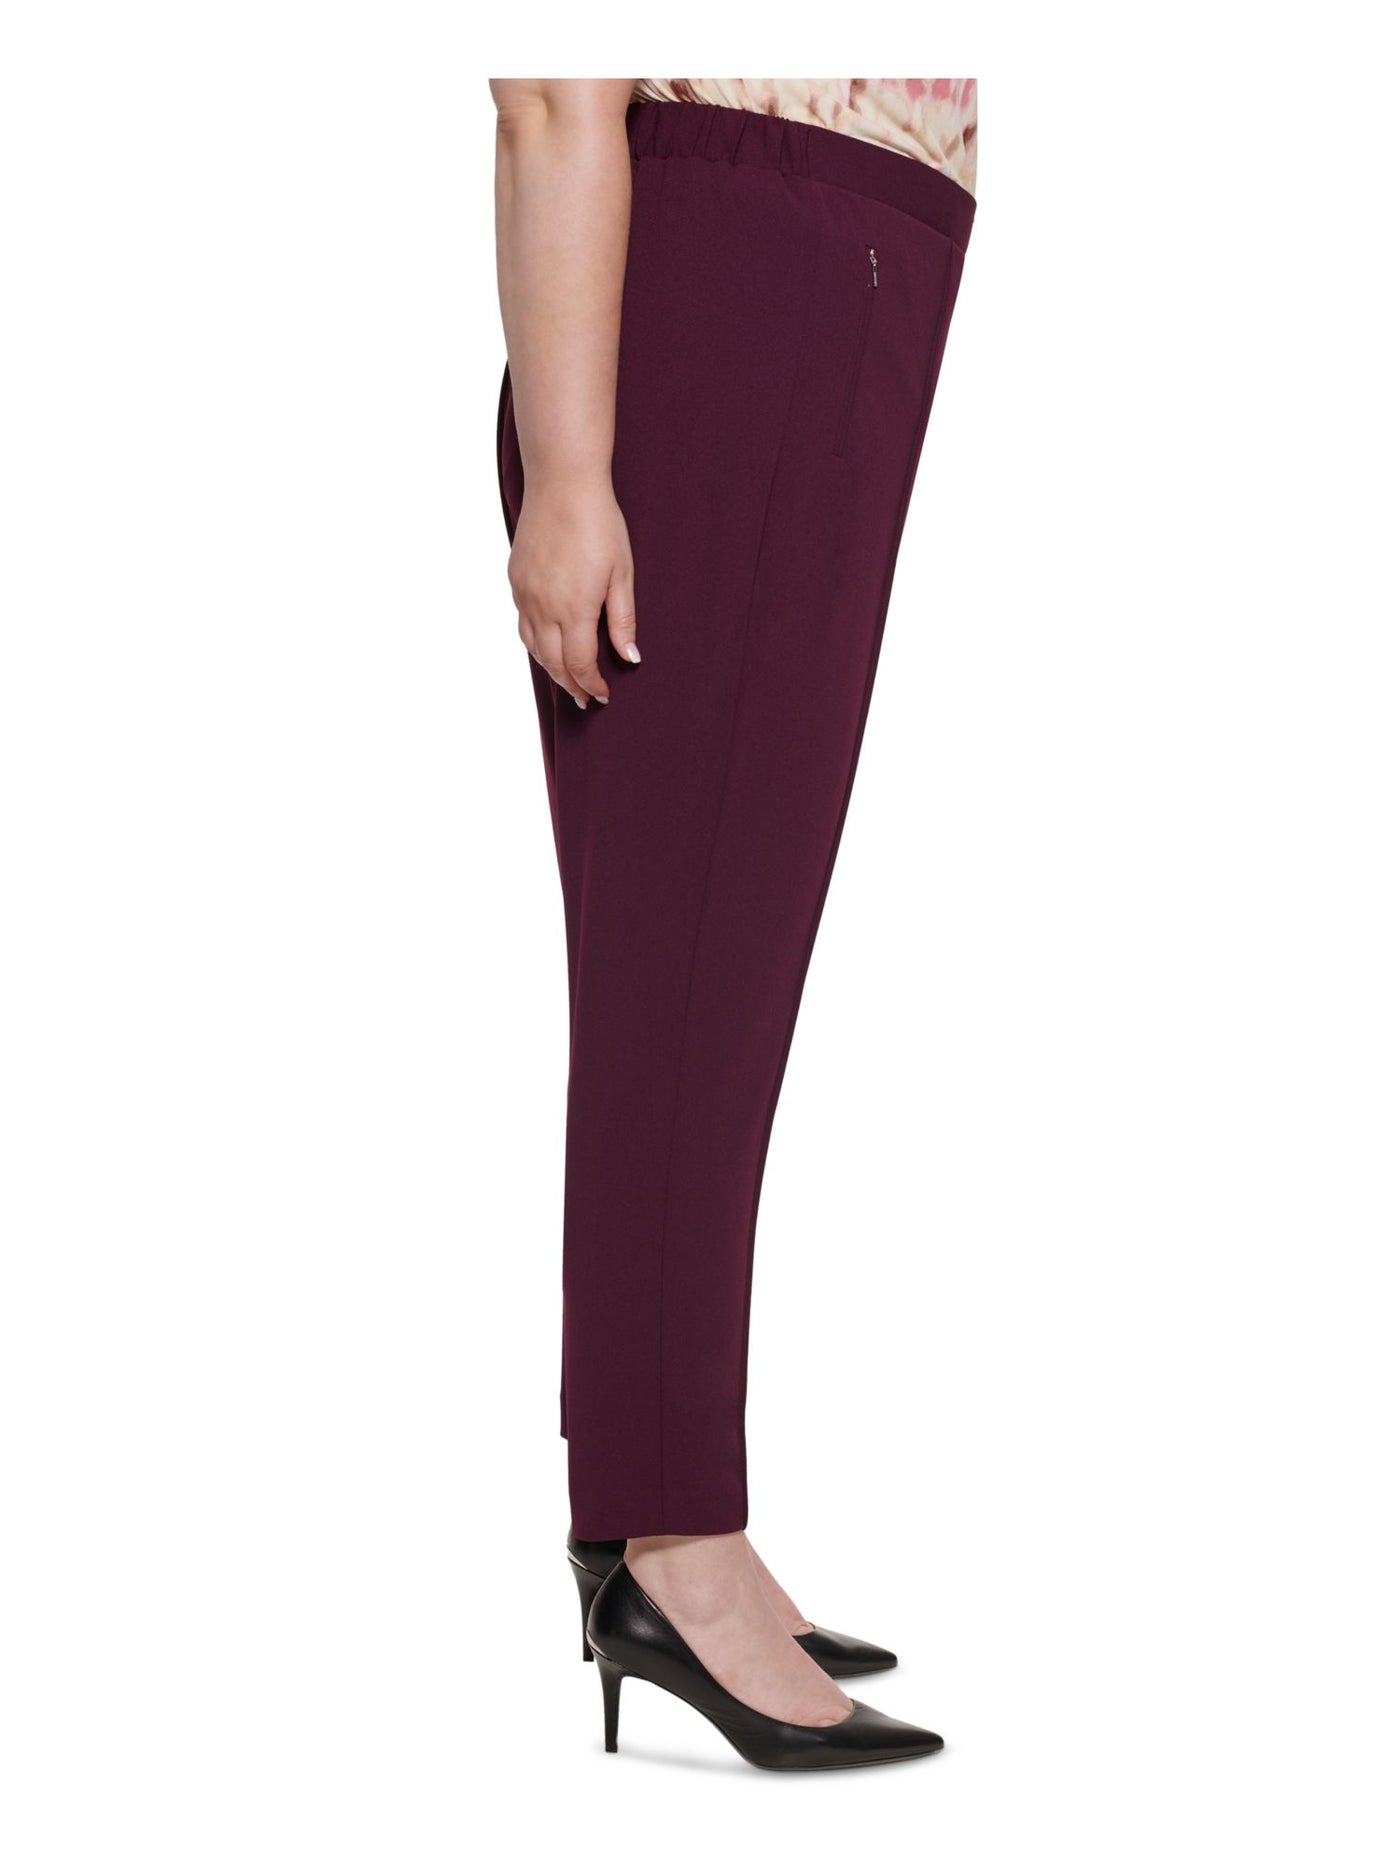 CALVIN KLEIN Womens Stretch Pocketed Mid-rise Pull-on Style Wear To Work Straight leg Pants